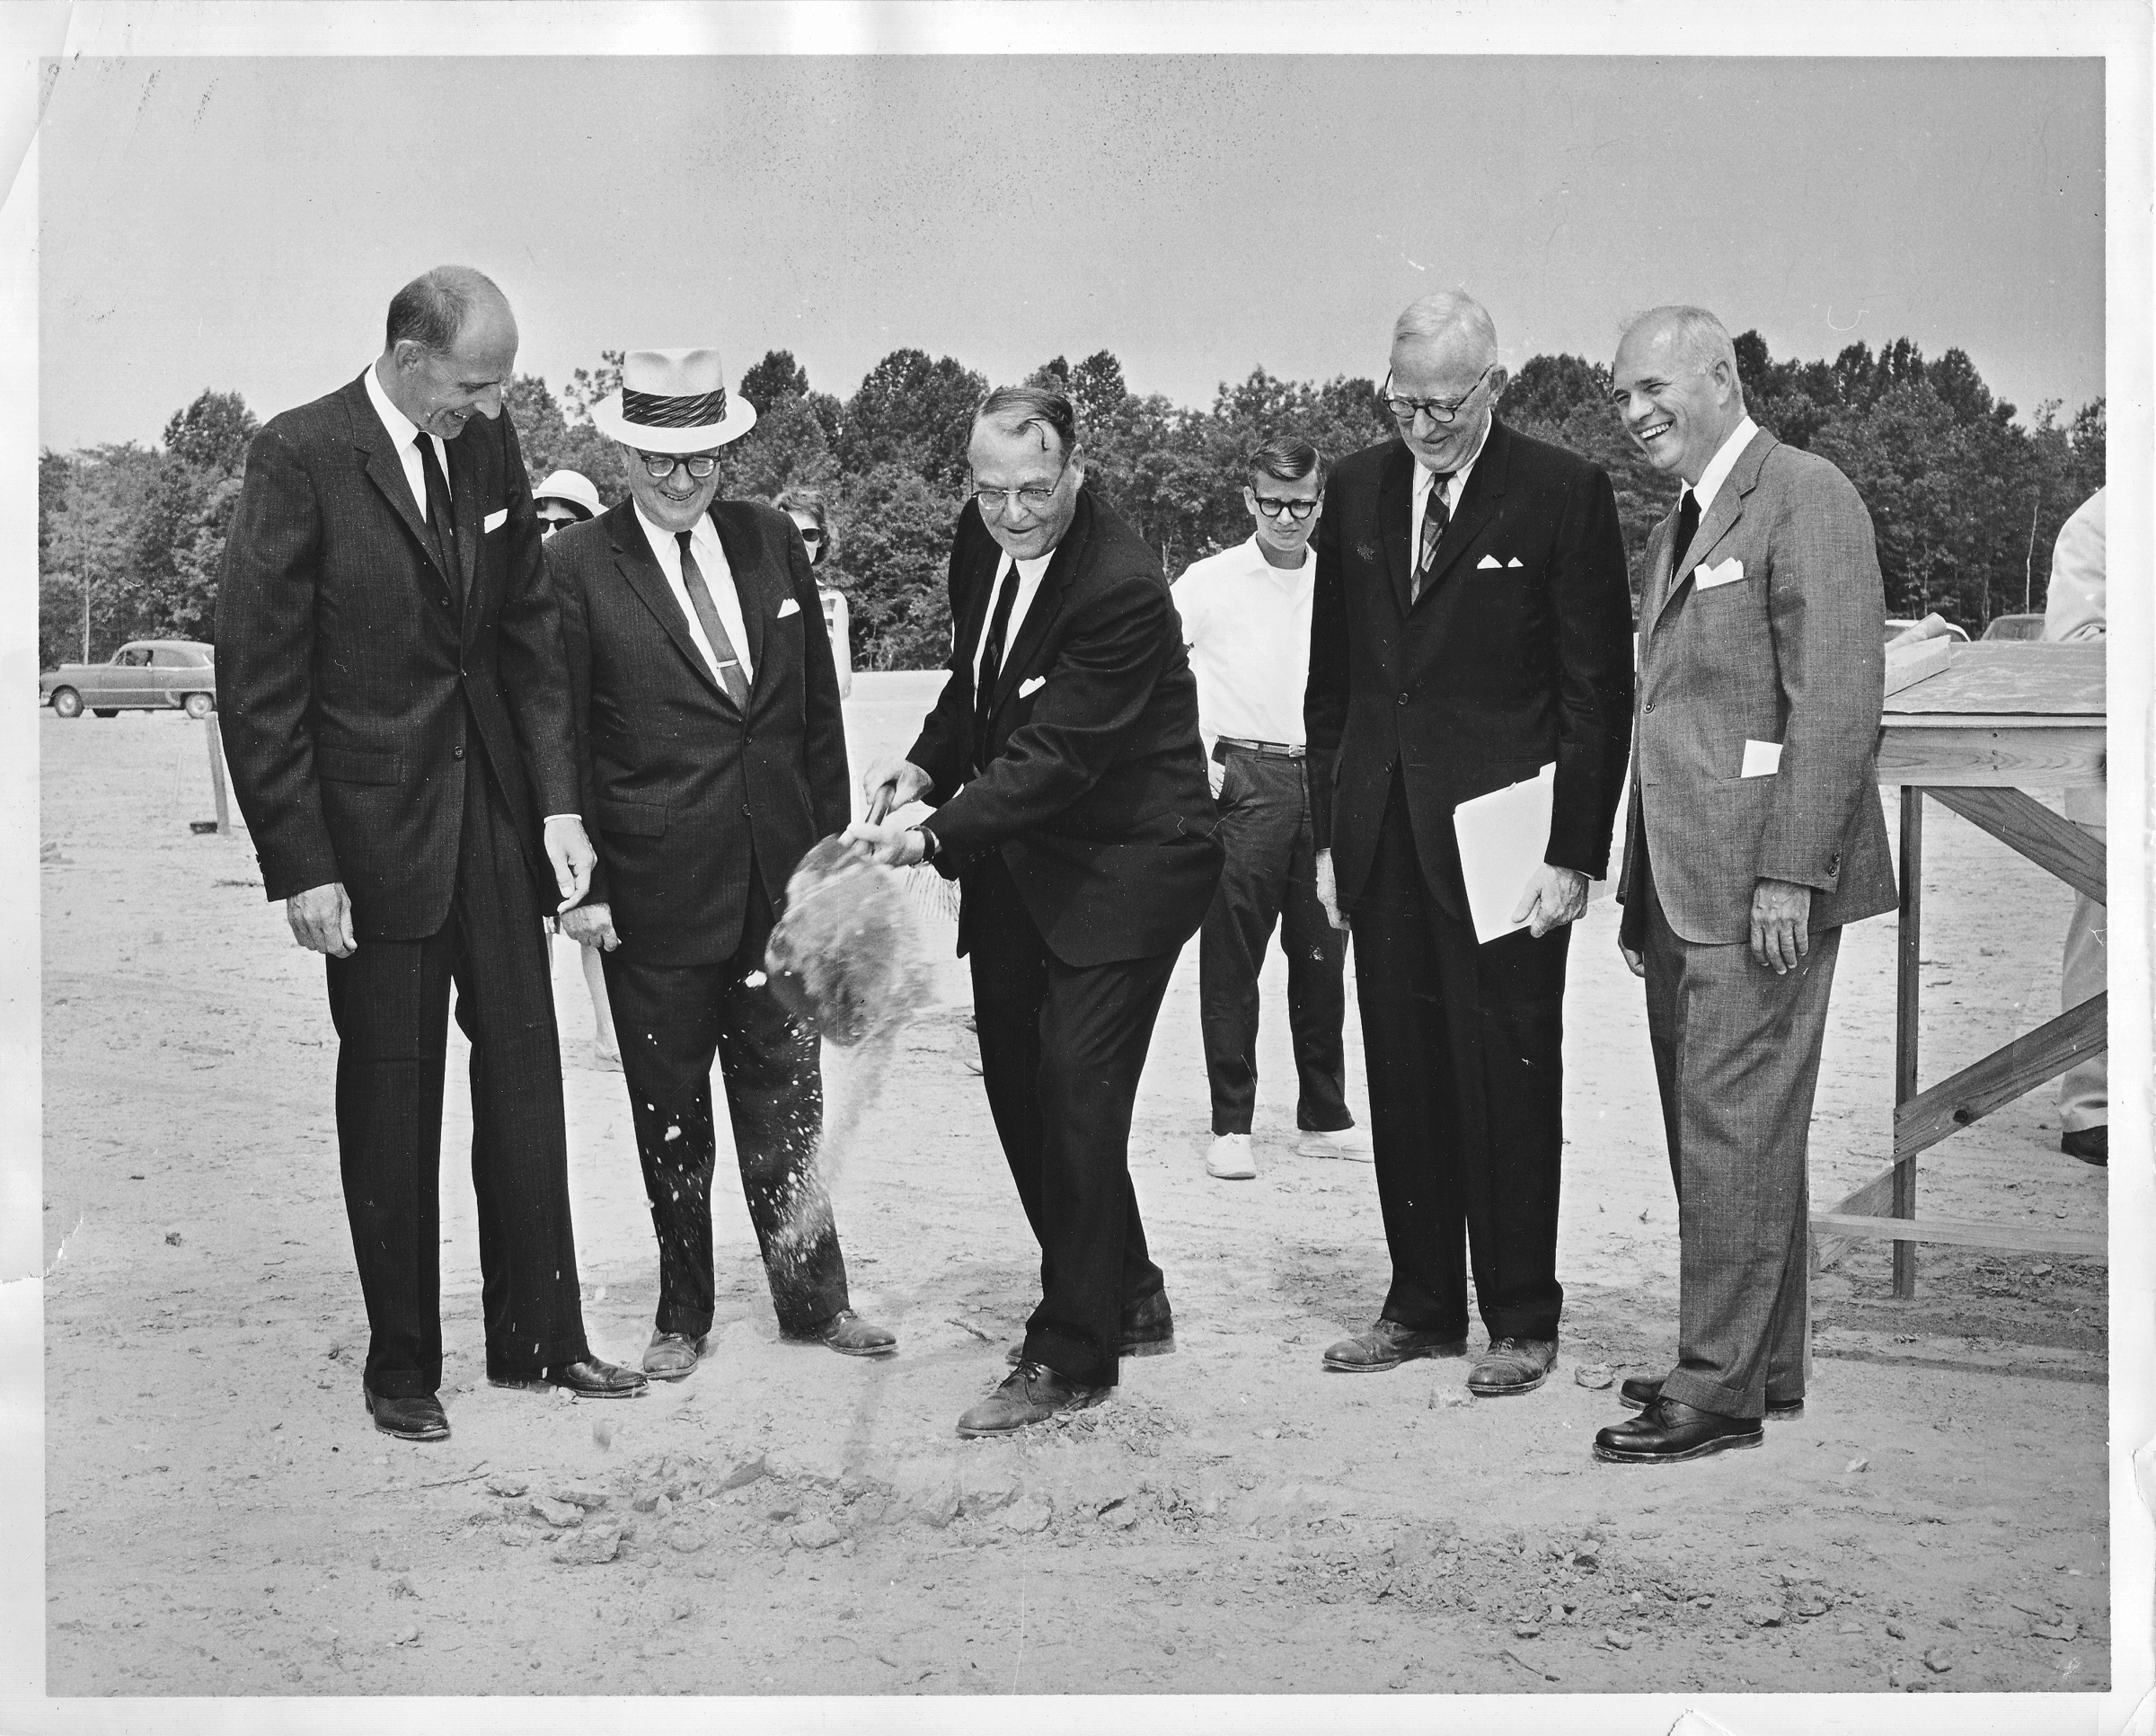 Groundbreaking ceremony for the Fairfax campus, August 1, 1963.